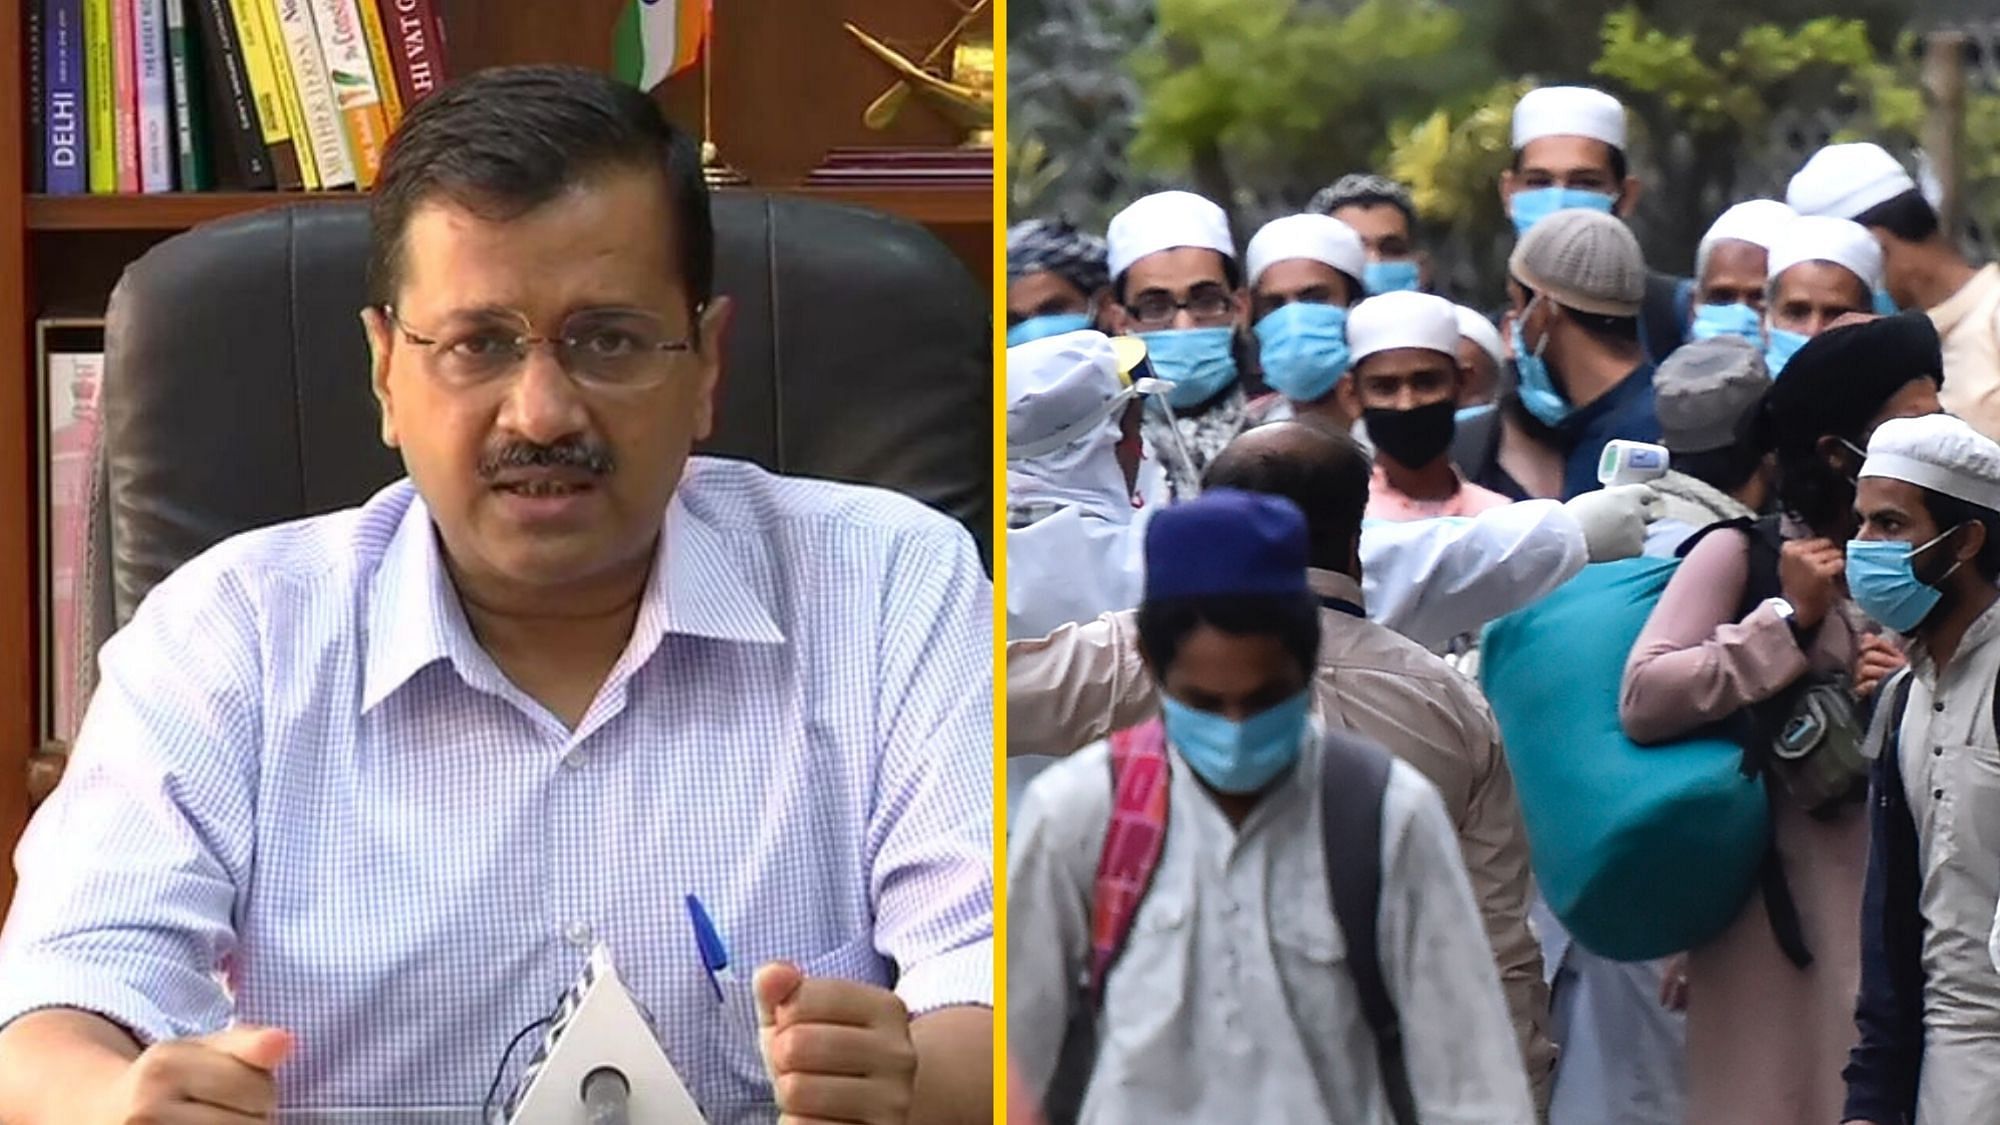 Delhi Chief Minister Arvind Kejriwal said 1,107 people, who attended religious congregation in Nizamudddin West, have been quarantined.